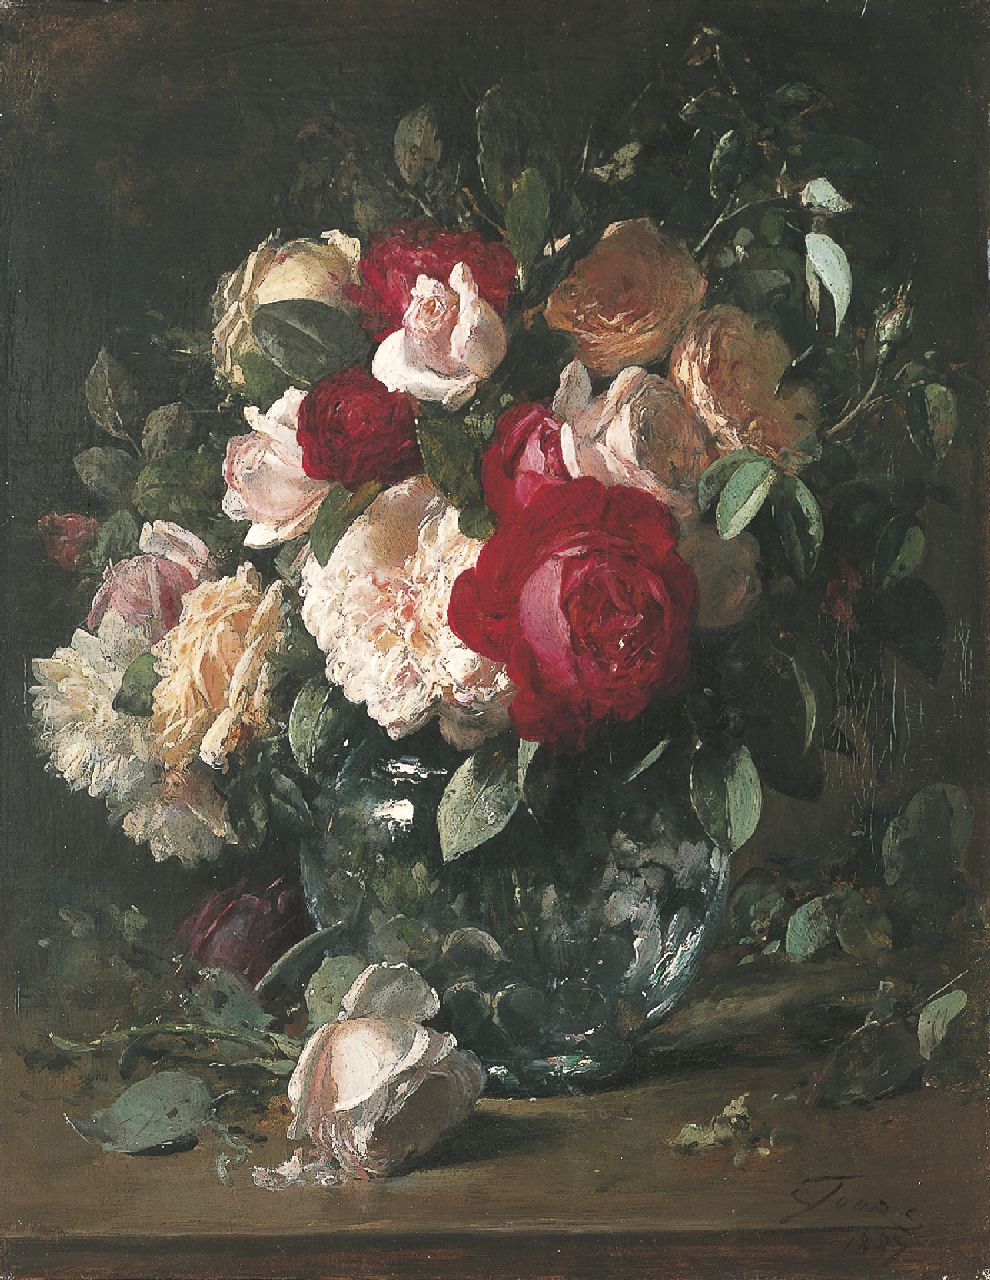 Joors E.  | Eugeen Joors | Paintings offered for sale | Roses in a glass vase, oil on canvas 45.5 x 35.6 cm, signed l.r. and dated 1887